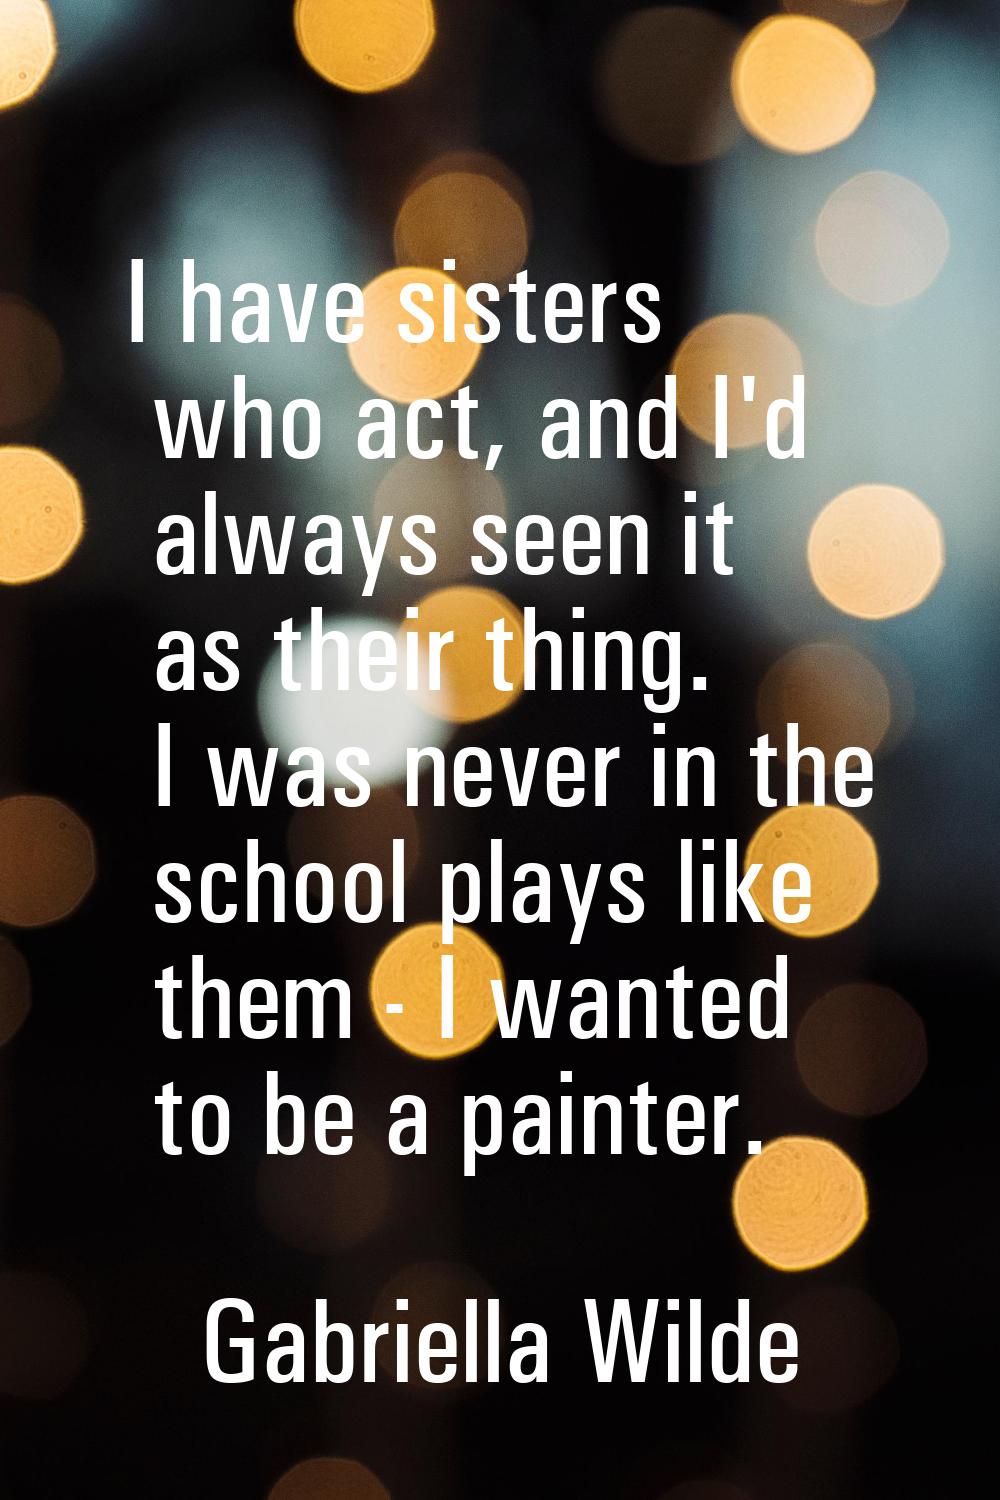 I have sisters who act, and I'd always seen it as their thing. I was never in the school plays like